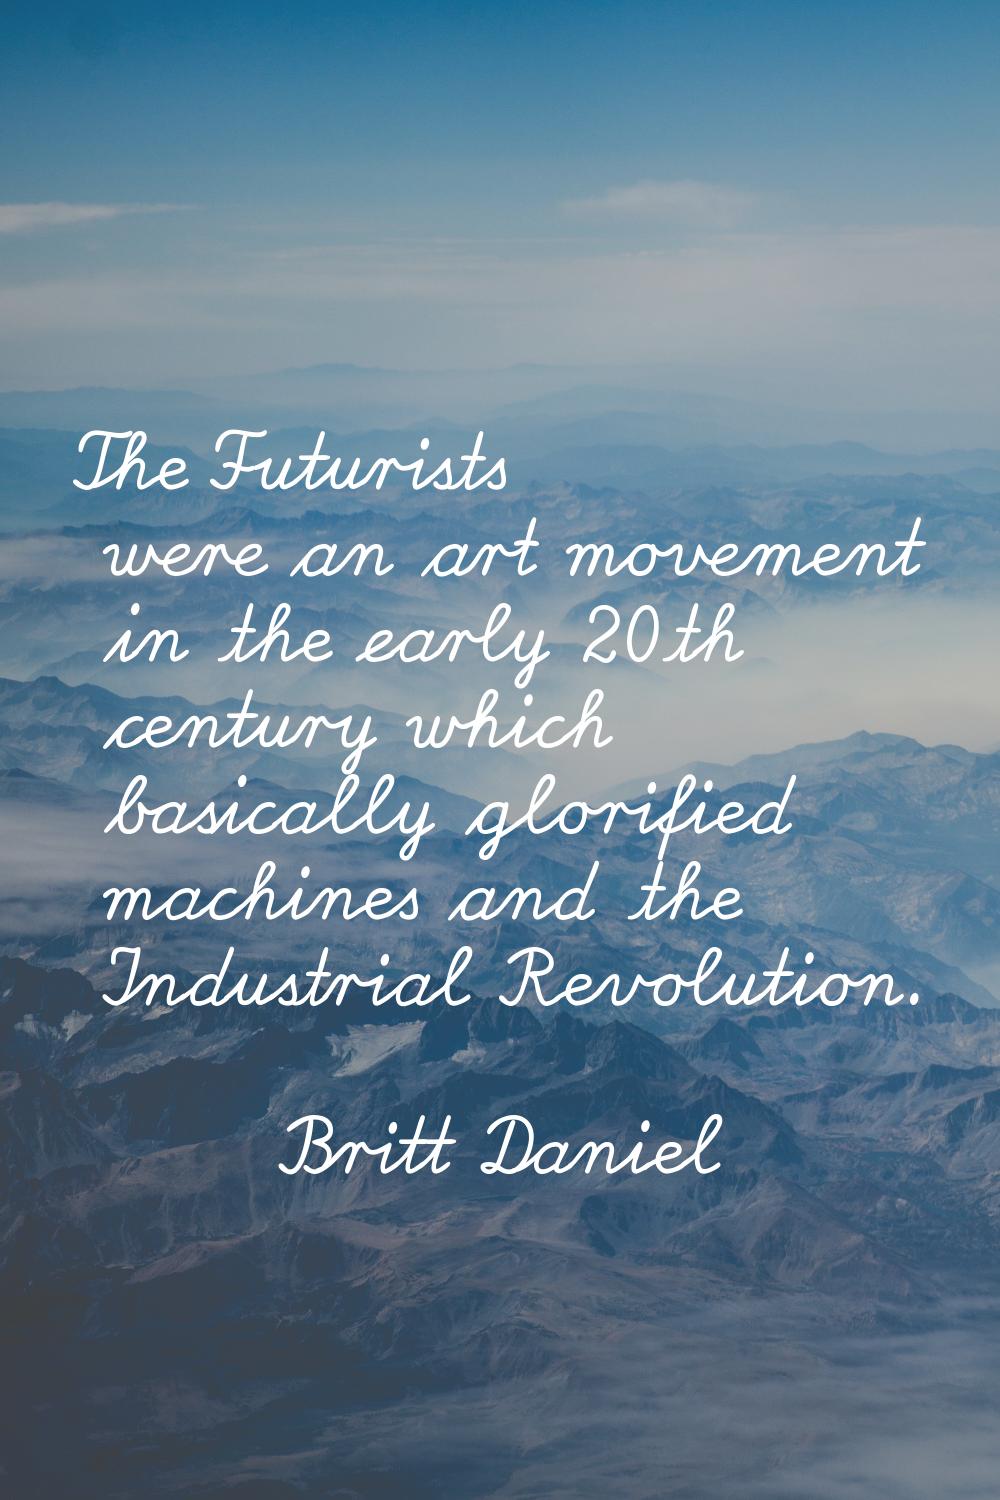 The Futurists were an art movement in the early 20th century which basically glorified machines and